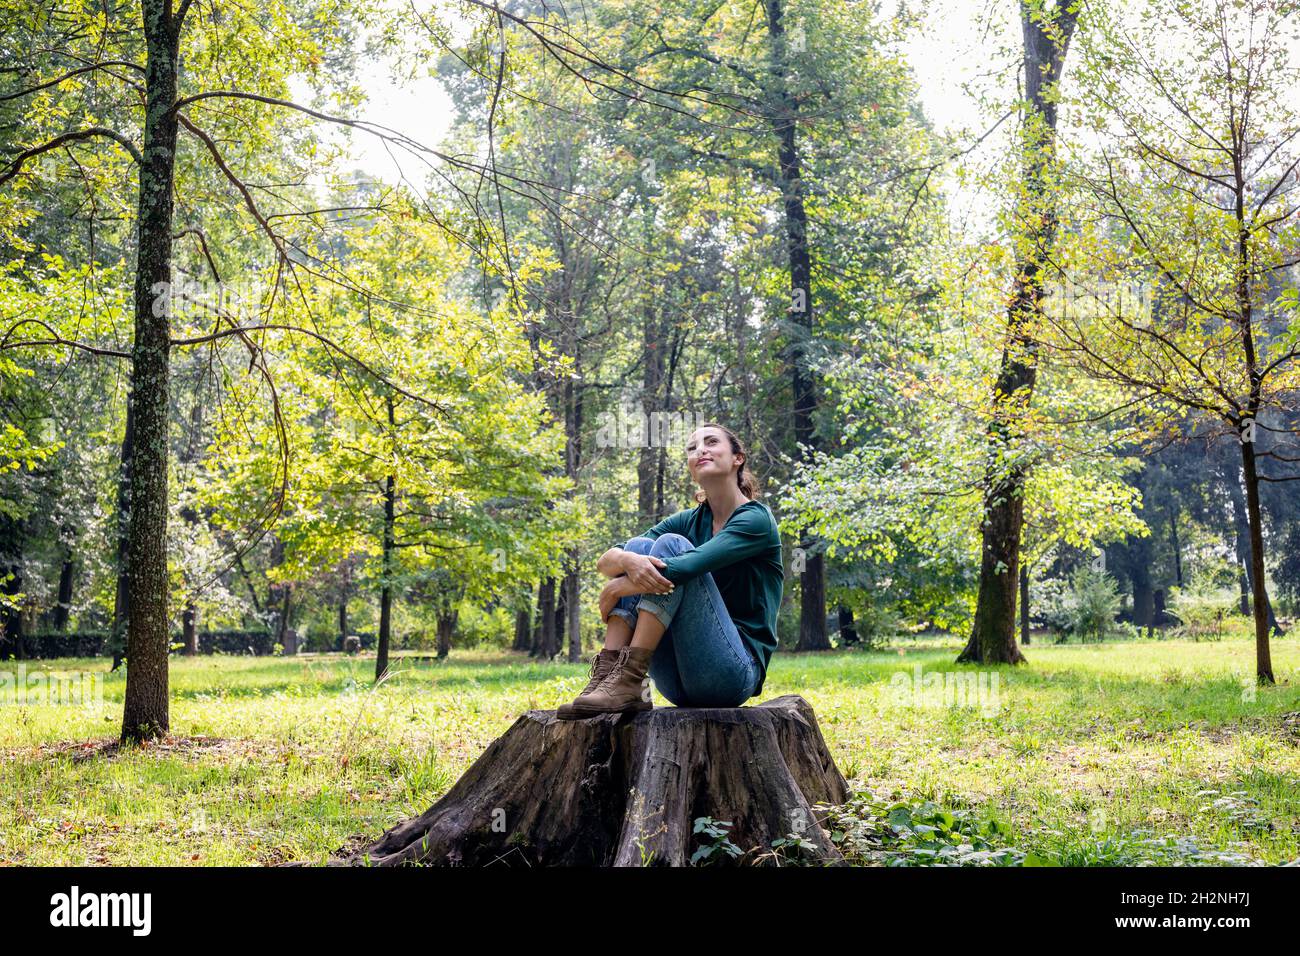 Thoughtful woman sitting in fetal position on tree stump Stock Photo